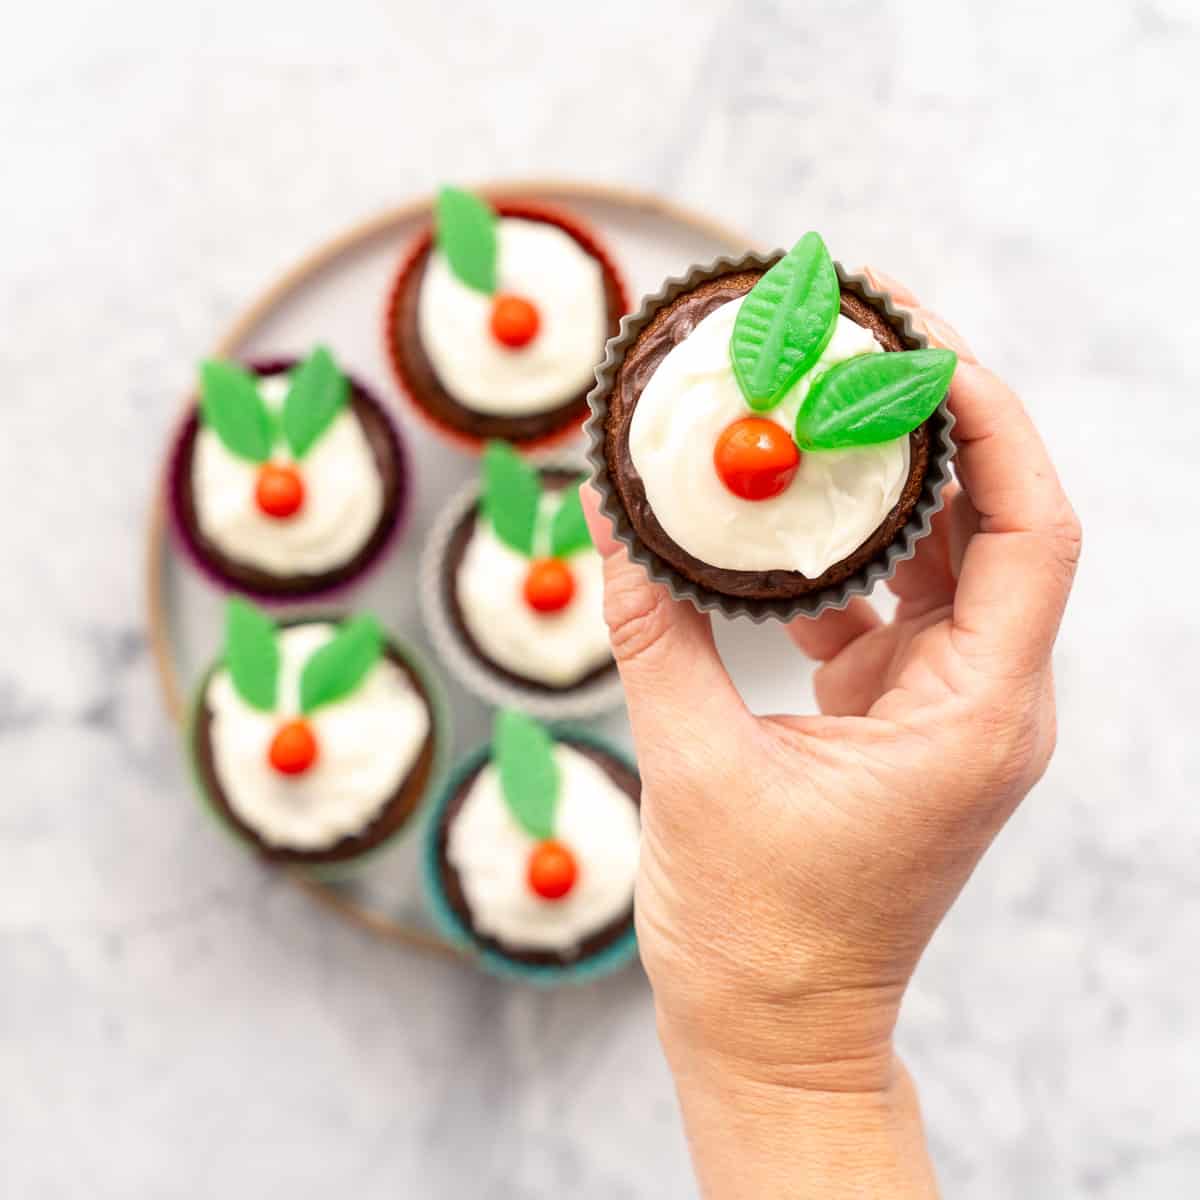 A cupcake decorated to look like a figgy pudding with frosting and candy being held up to the camera.